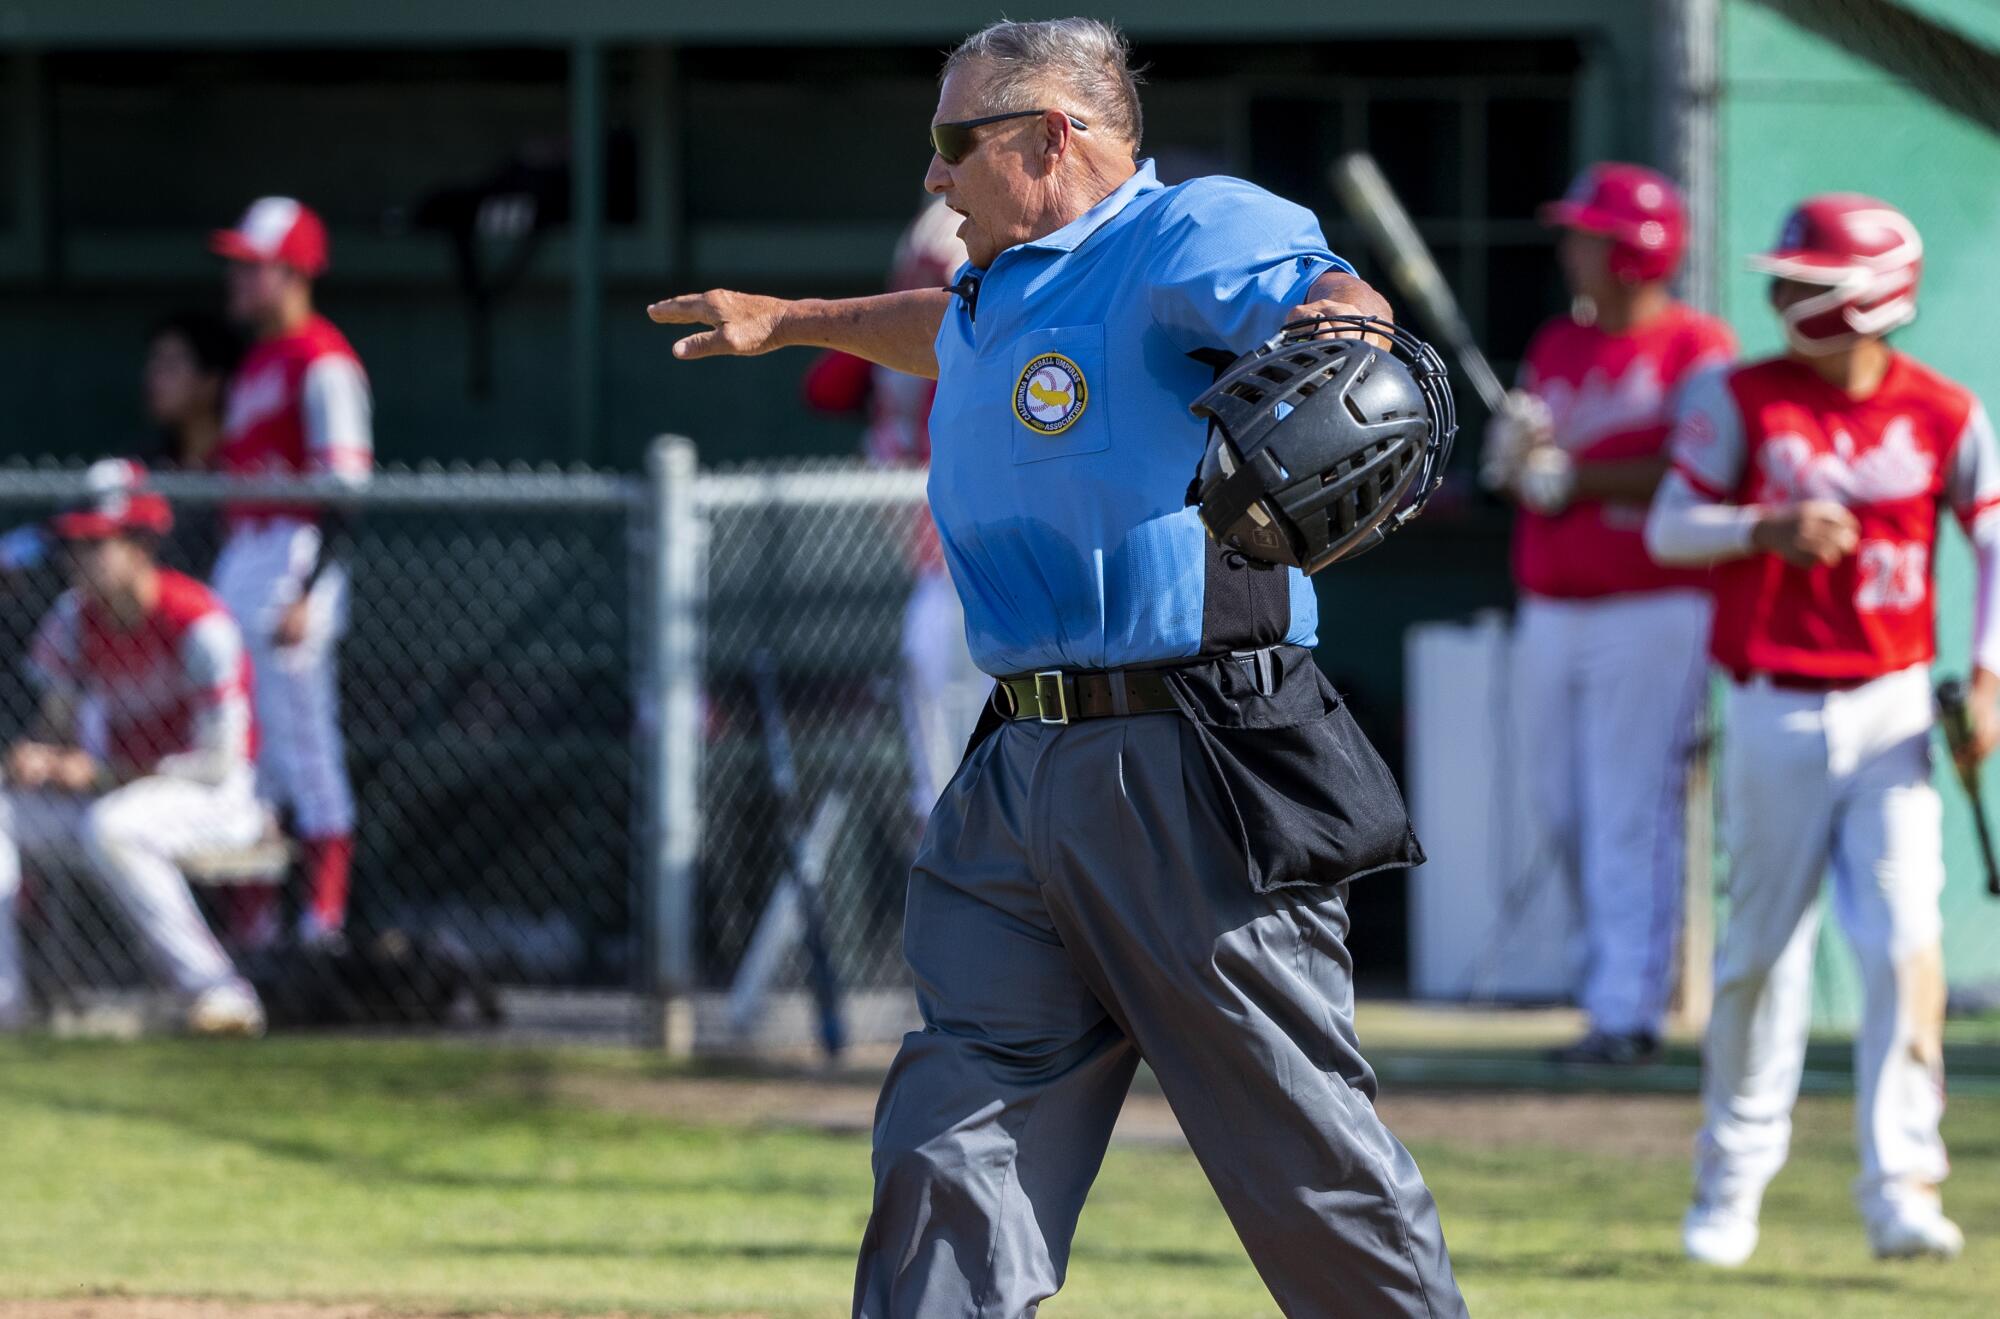 Umpire Jim Trentin lifts his arms during a game.